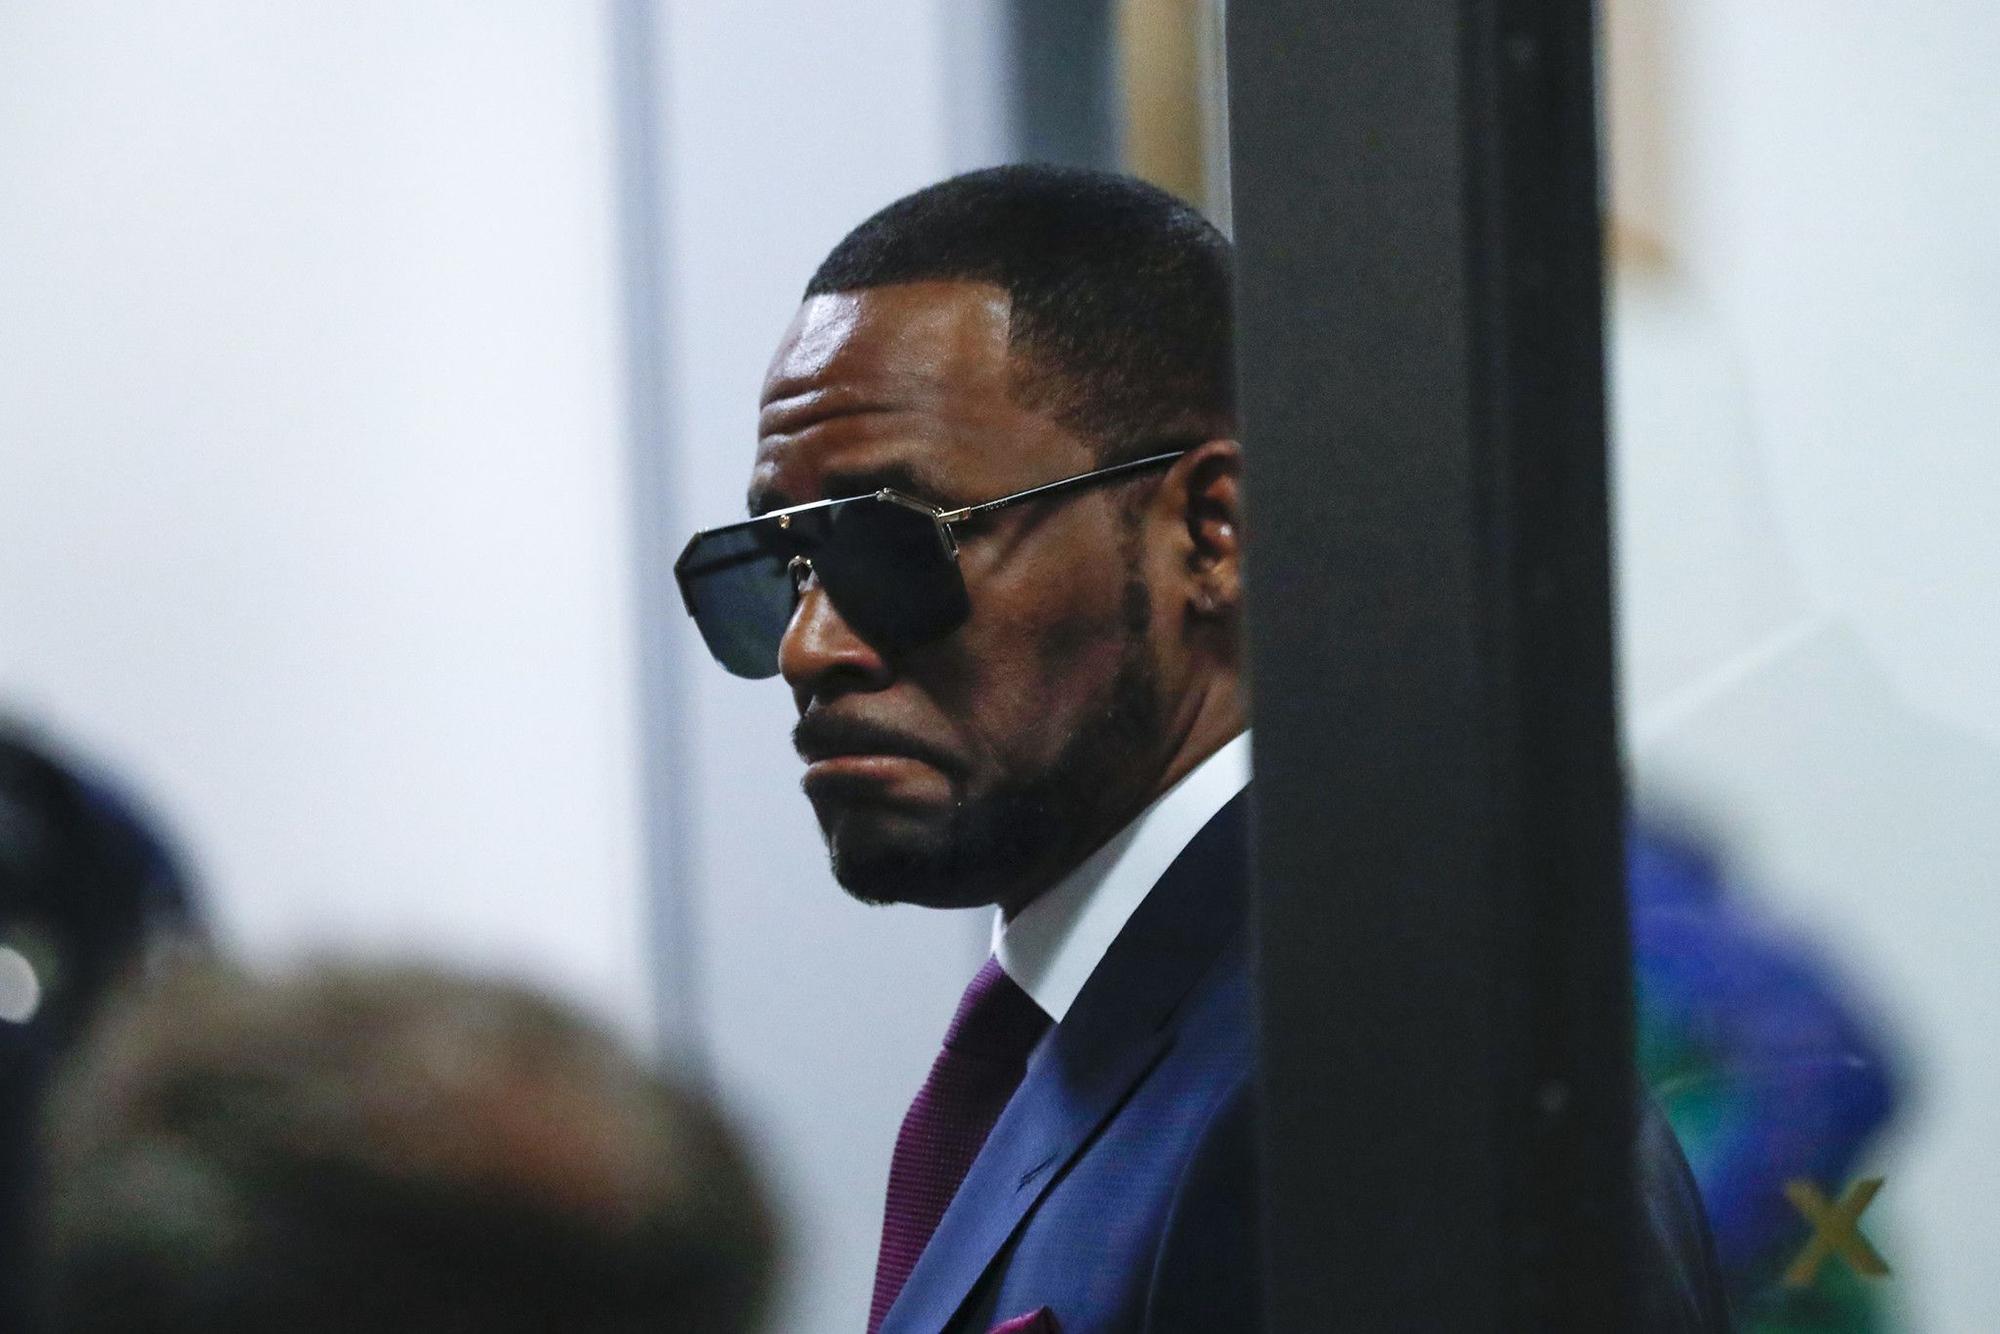 R. Kelly is seen at the Daley Center in Chicago for a child support hearing on March 13, 2019